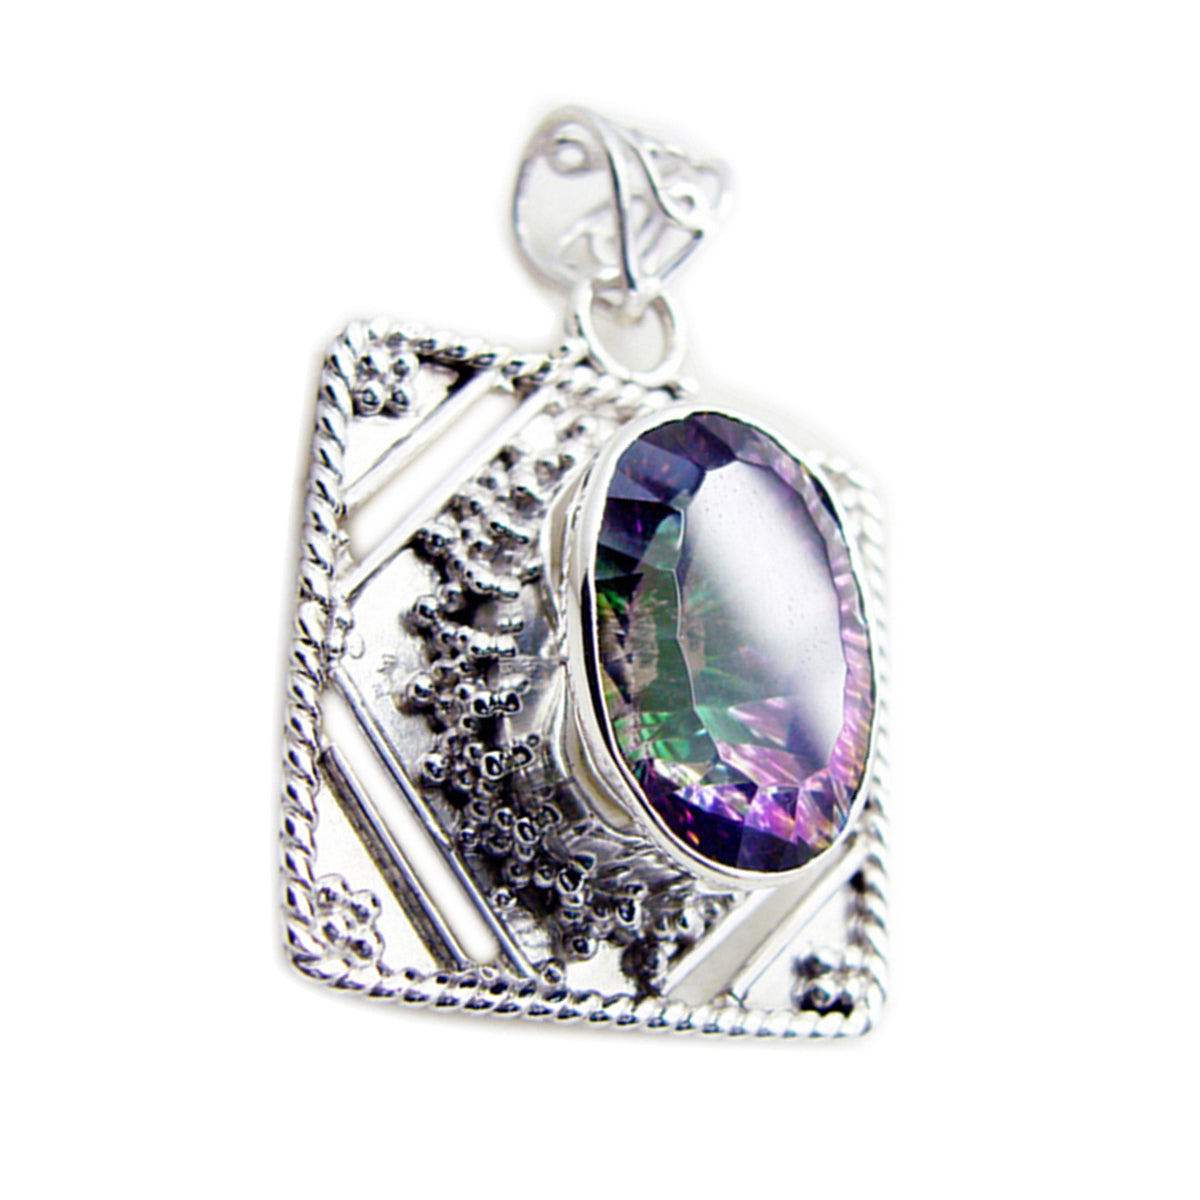 Riyo Glamorous Gems Oval Faceted Multi Color Mystic Quartz Solid Silver Pendant Gift For Anniversary